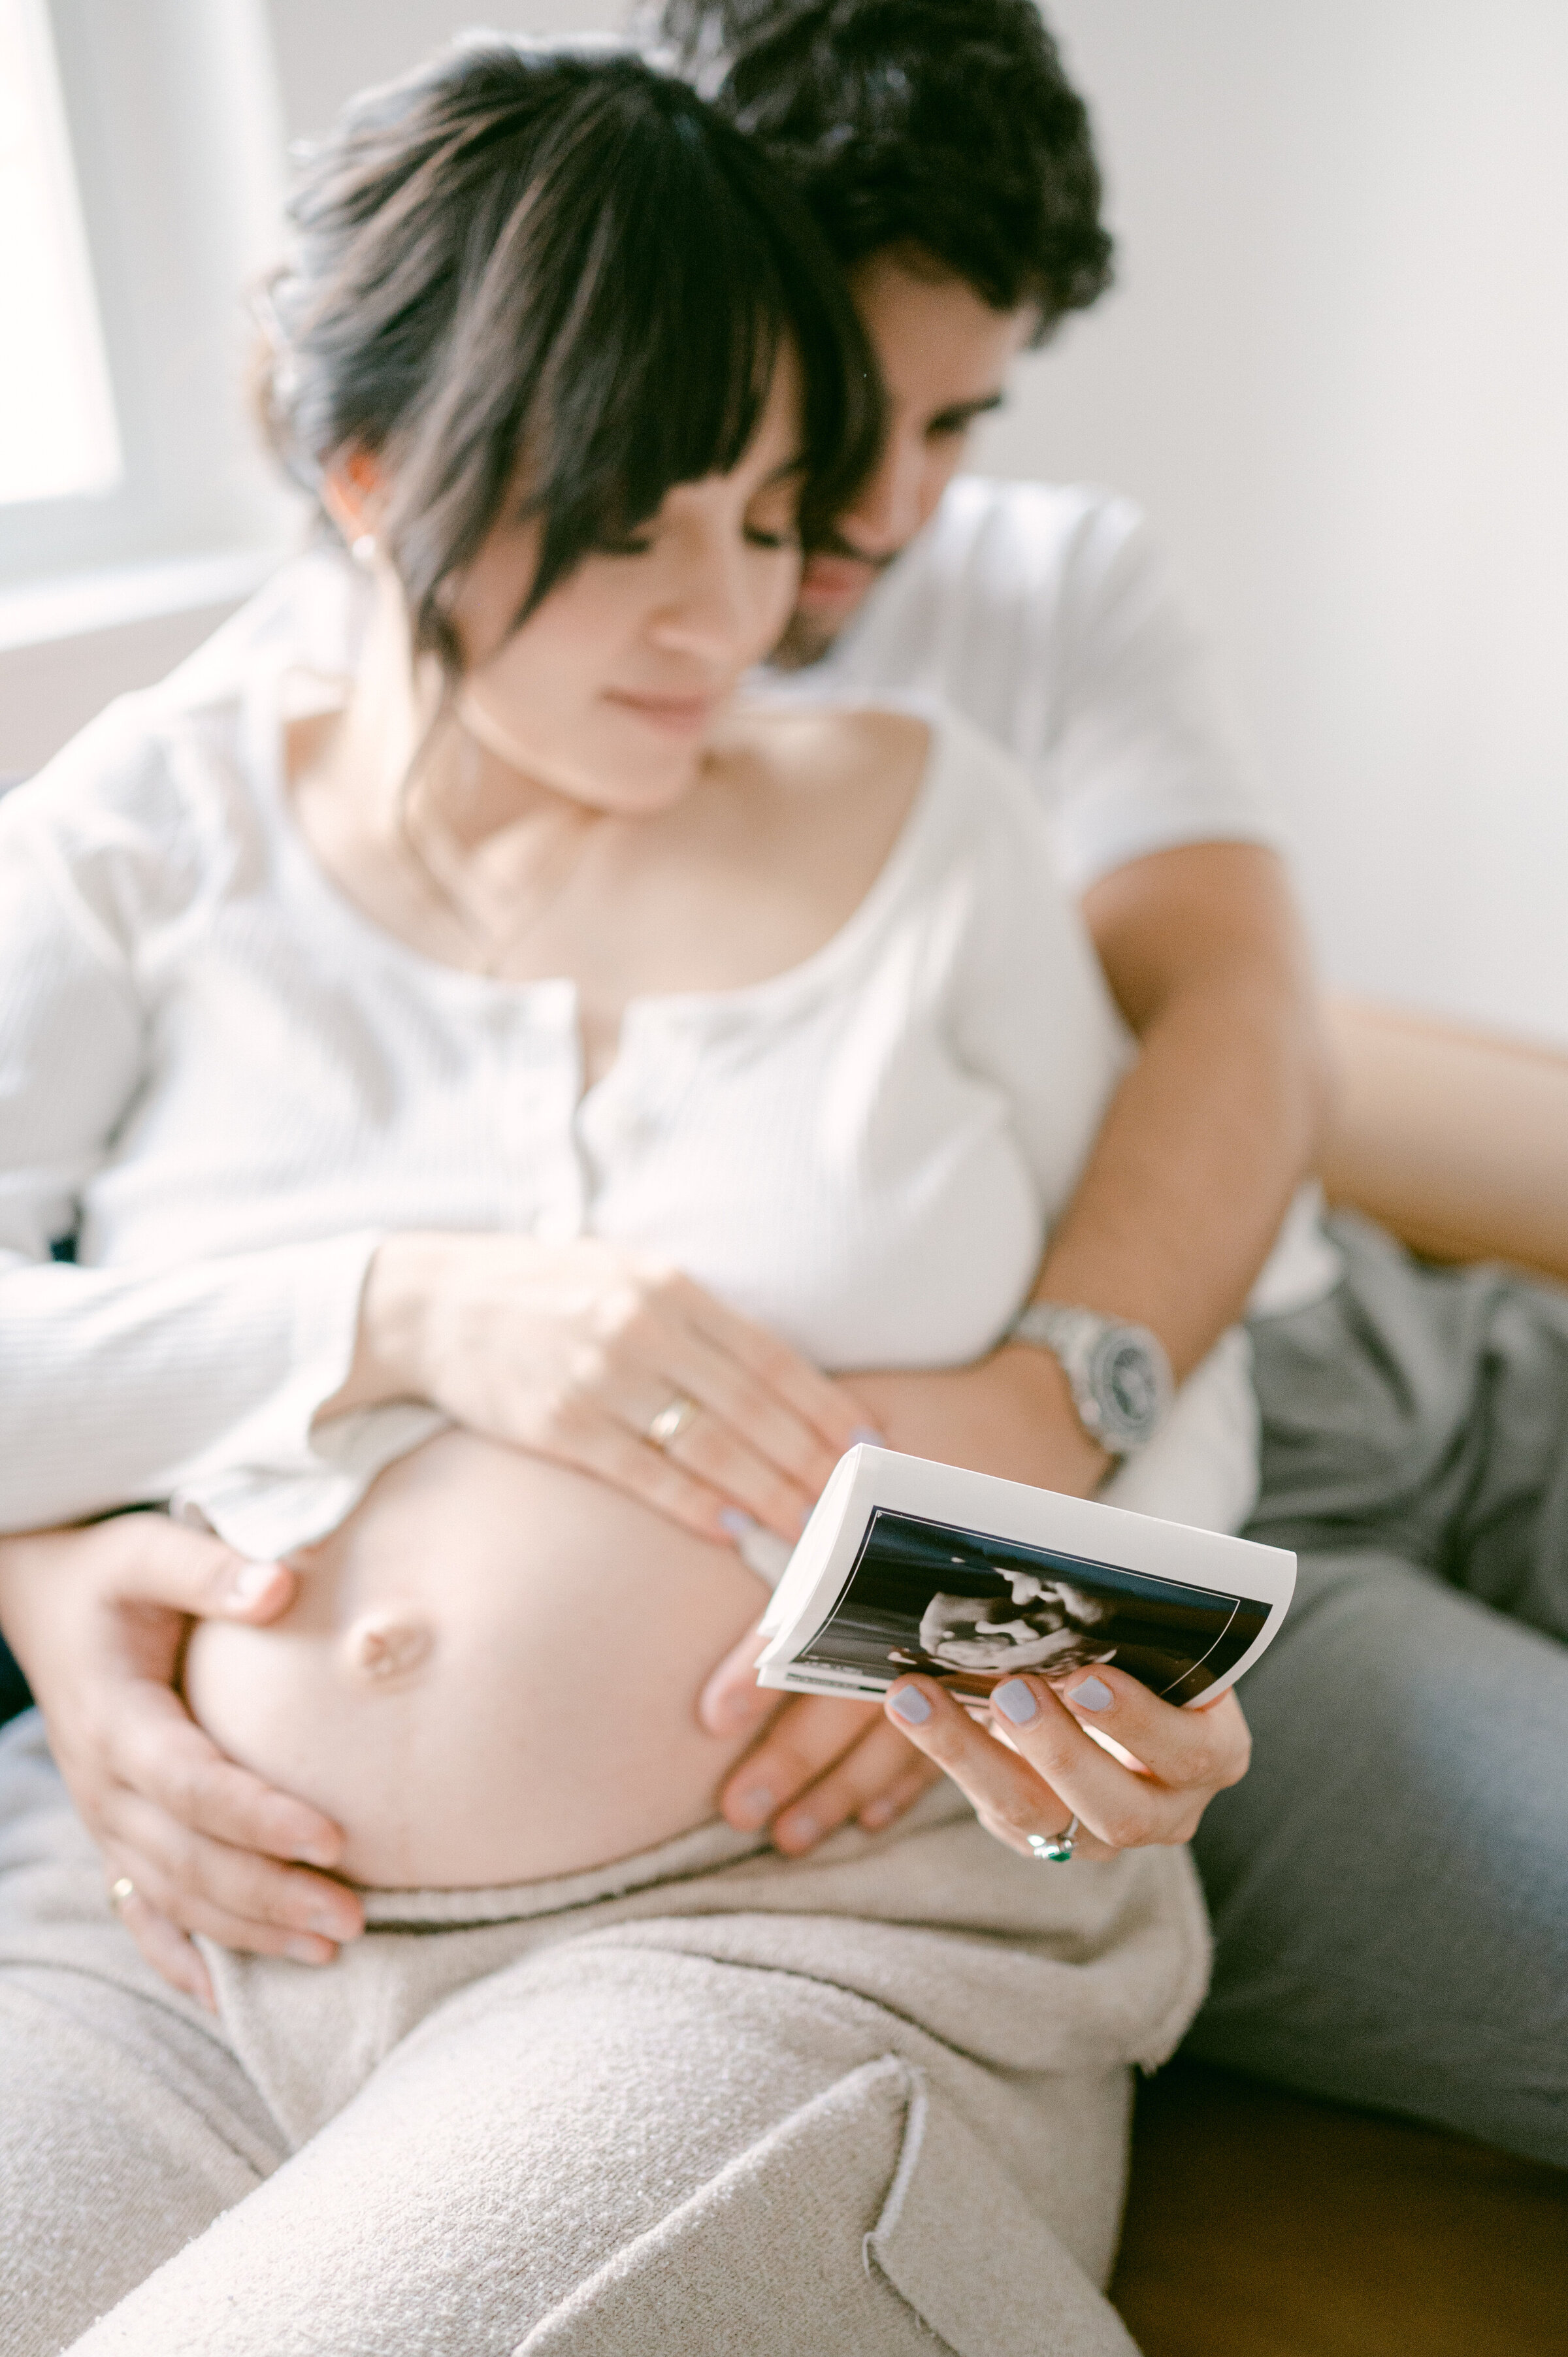 Parents-to-be looking at their ultrasound by Miami Newborn Photographer